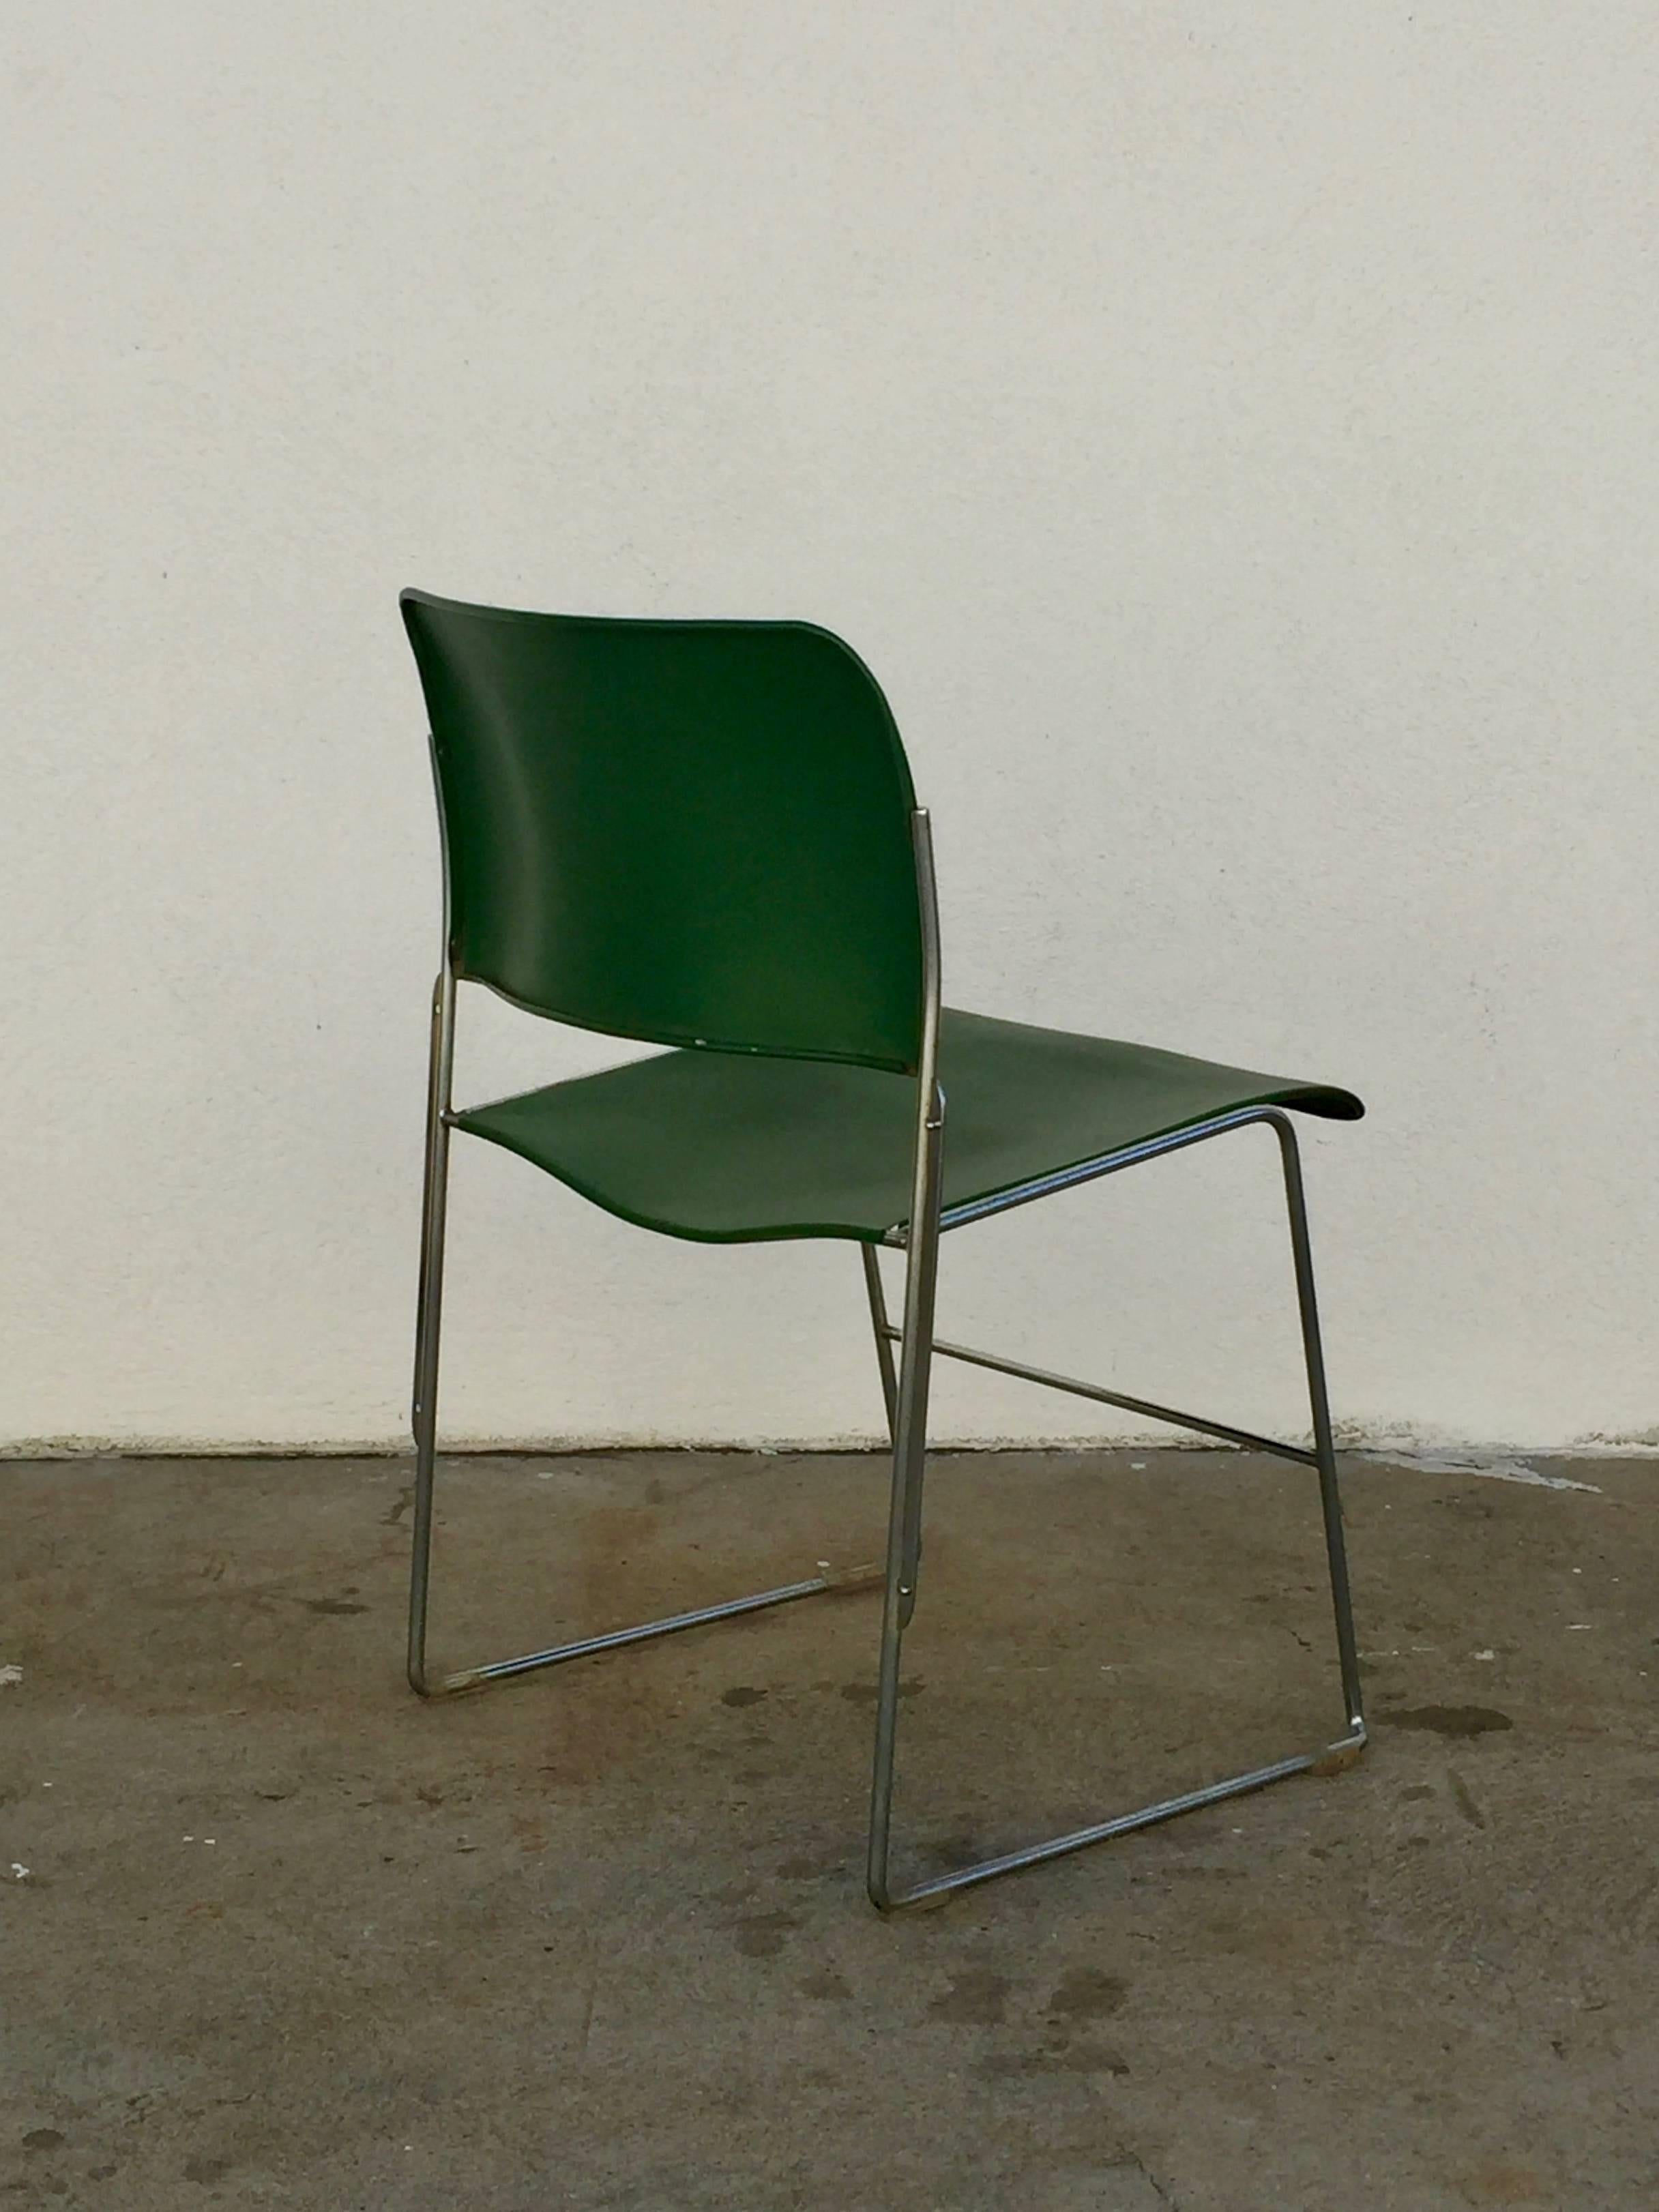 Powder-Coated Set of 40/4 Green Chairs by David Rowland